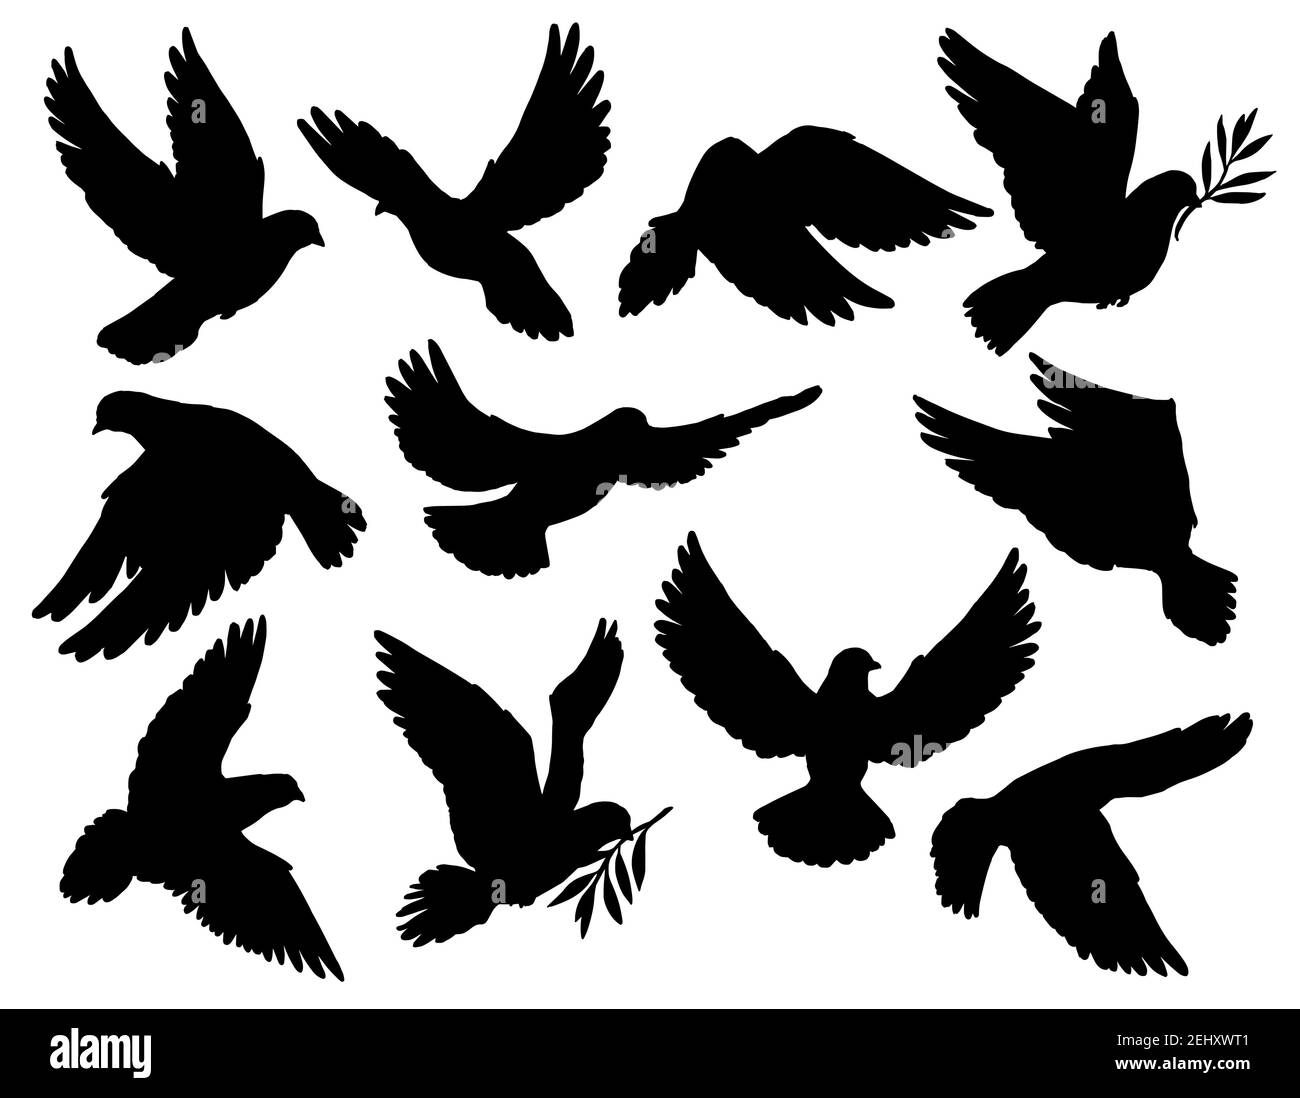 Dove silhouettes with olive branch, peace symbol. Vector pigeon with spread wings flying with laurel stem in beak. Holy bird in Christianity, freedom Stock Vector